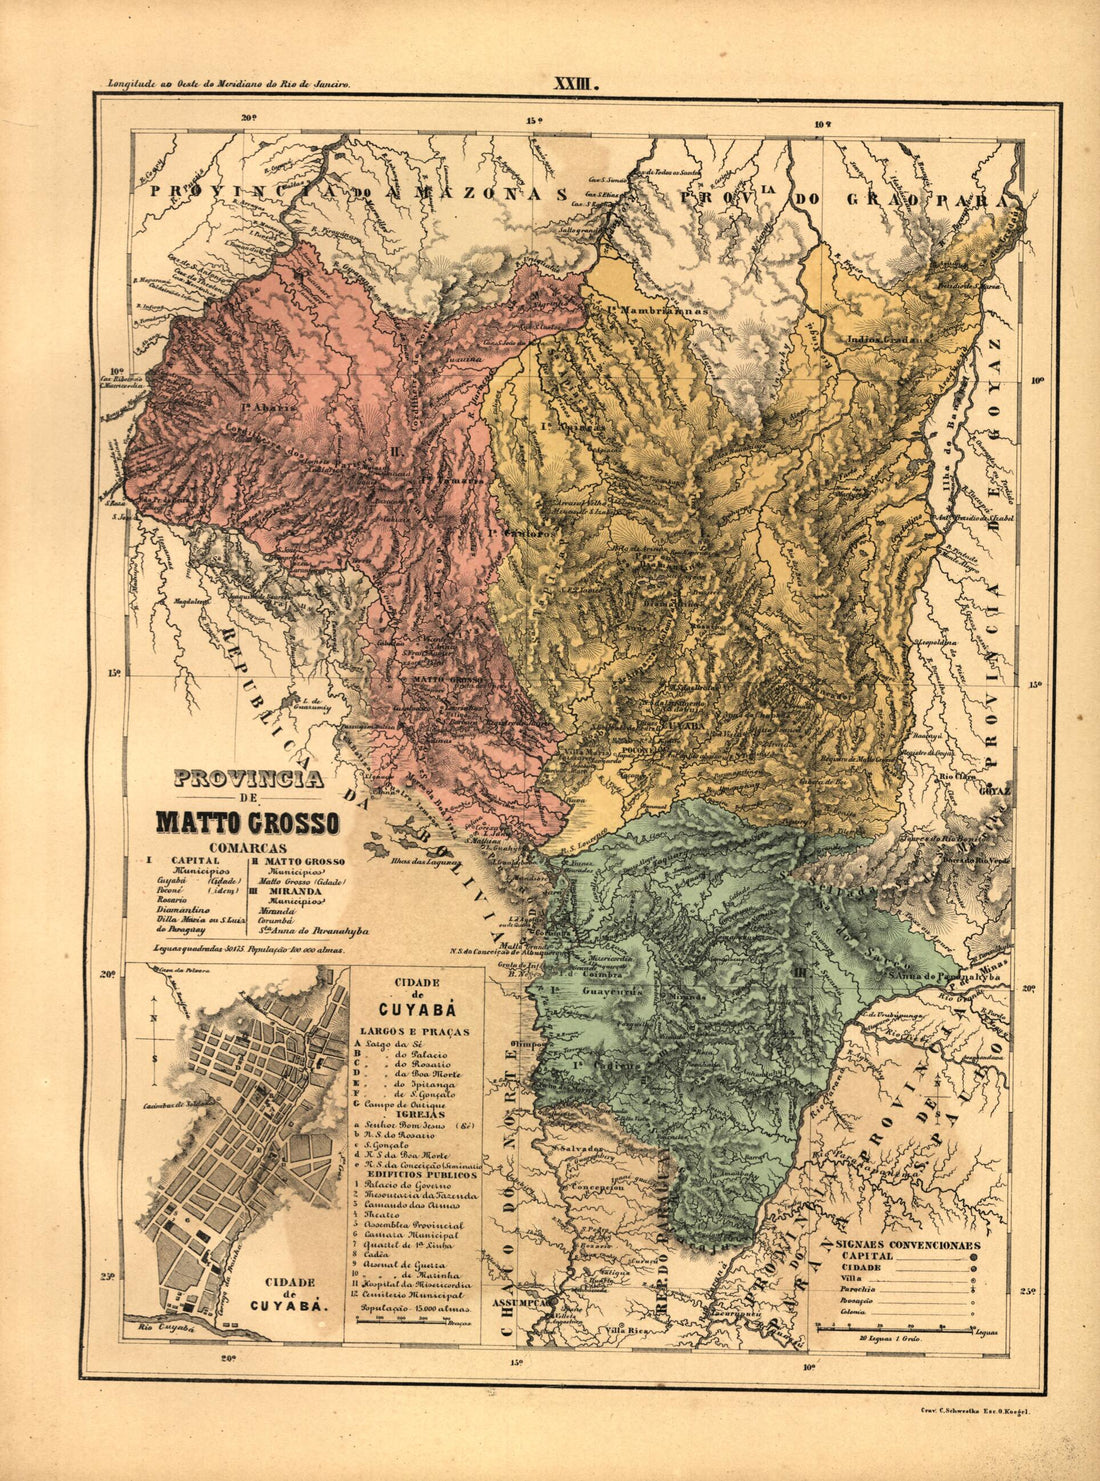 This old map of Provincia De Goyas from Atlas Do Imperio Do Brazil from 1868 was created by Cândido Mendes in 1868